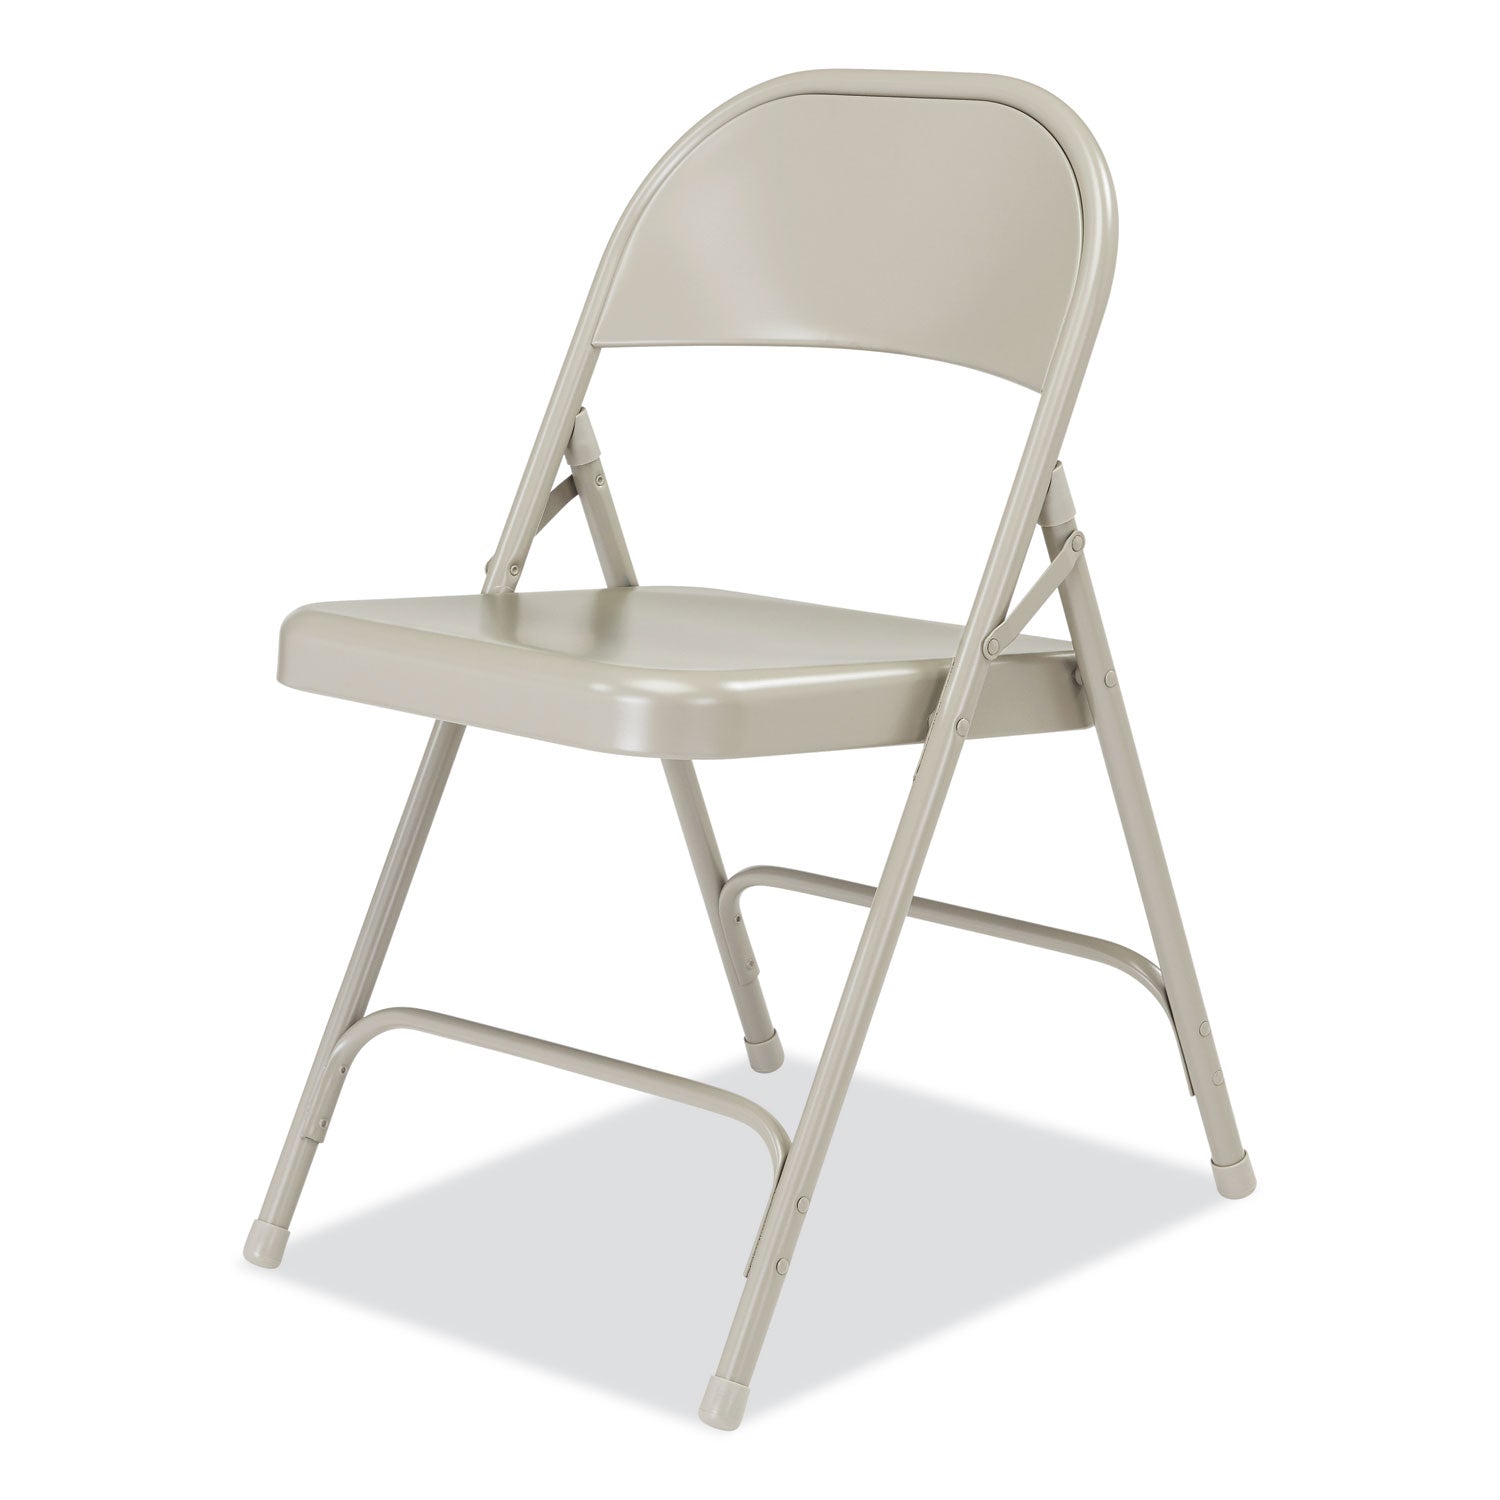 50-series-all-steel-folding-chair-supports-500-lb-1675-seat-height-gray-seat-back-base-4-carton-ships-in-1-3-bus-days_nps52 - 3